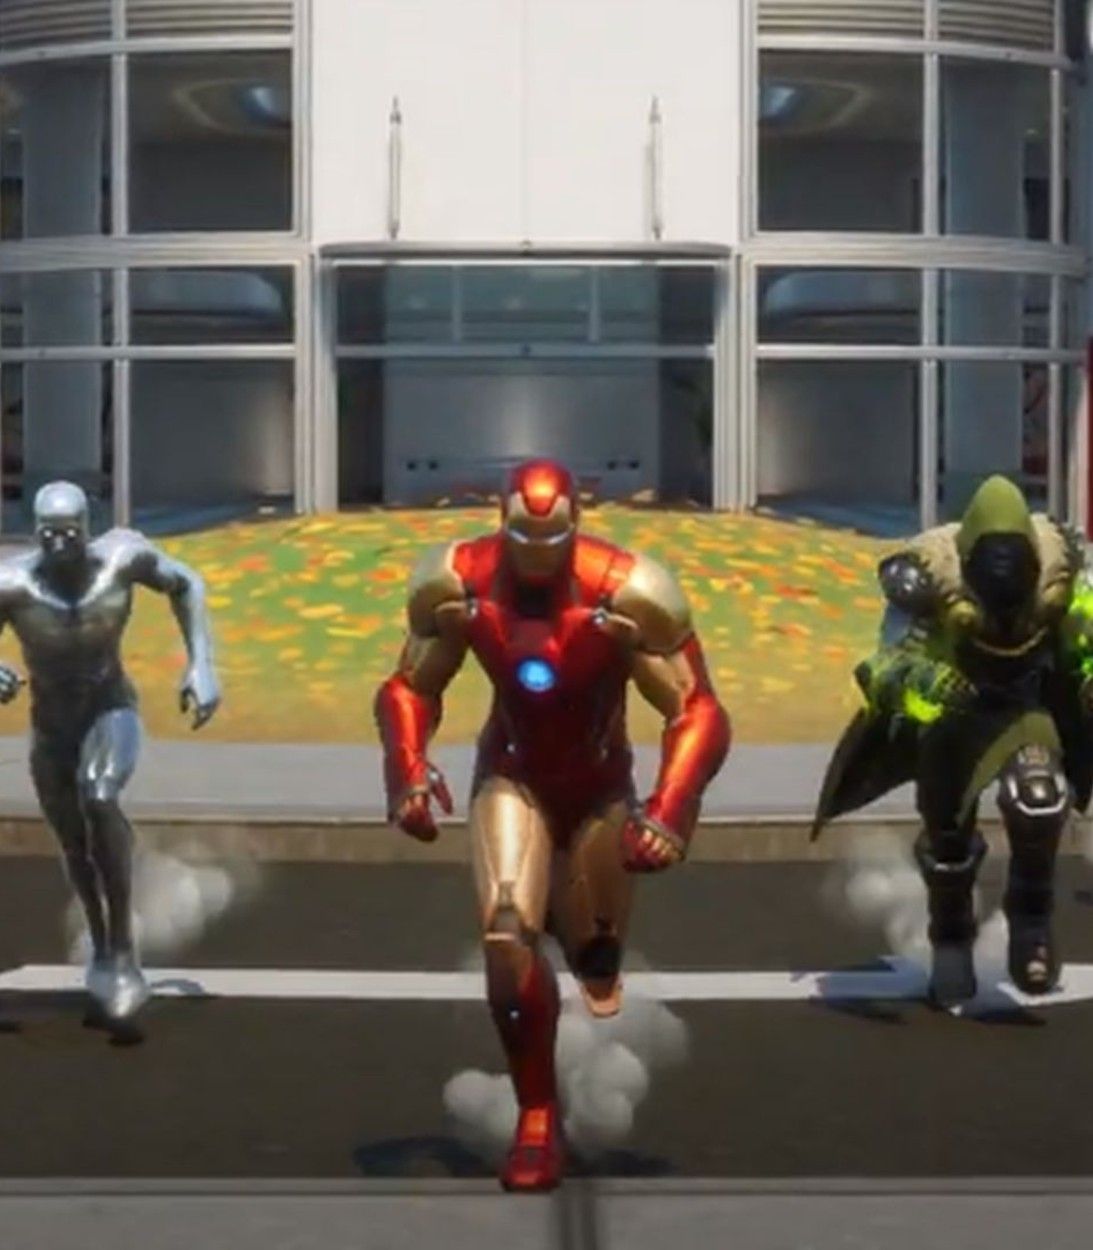 Some of the Marvel superhero characters in front of the new Stark Industries location in Fortnite Season 4